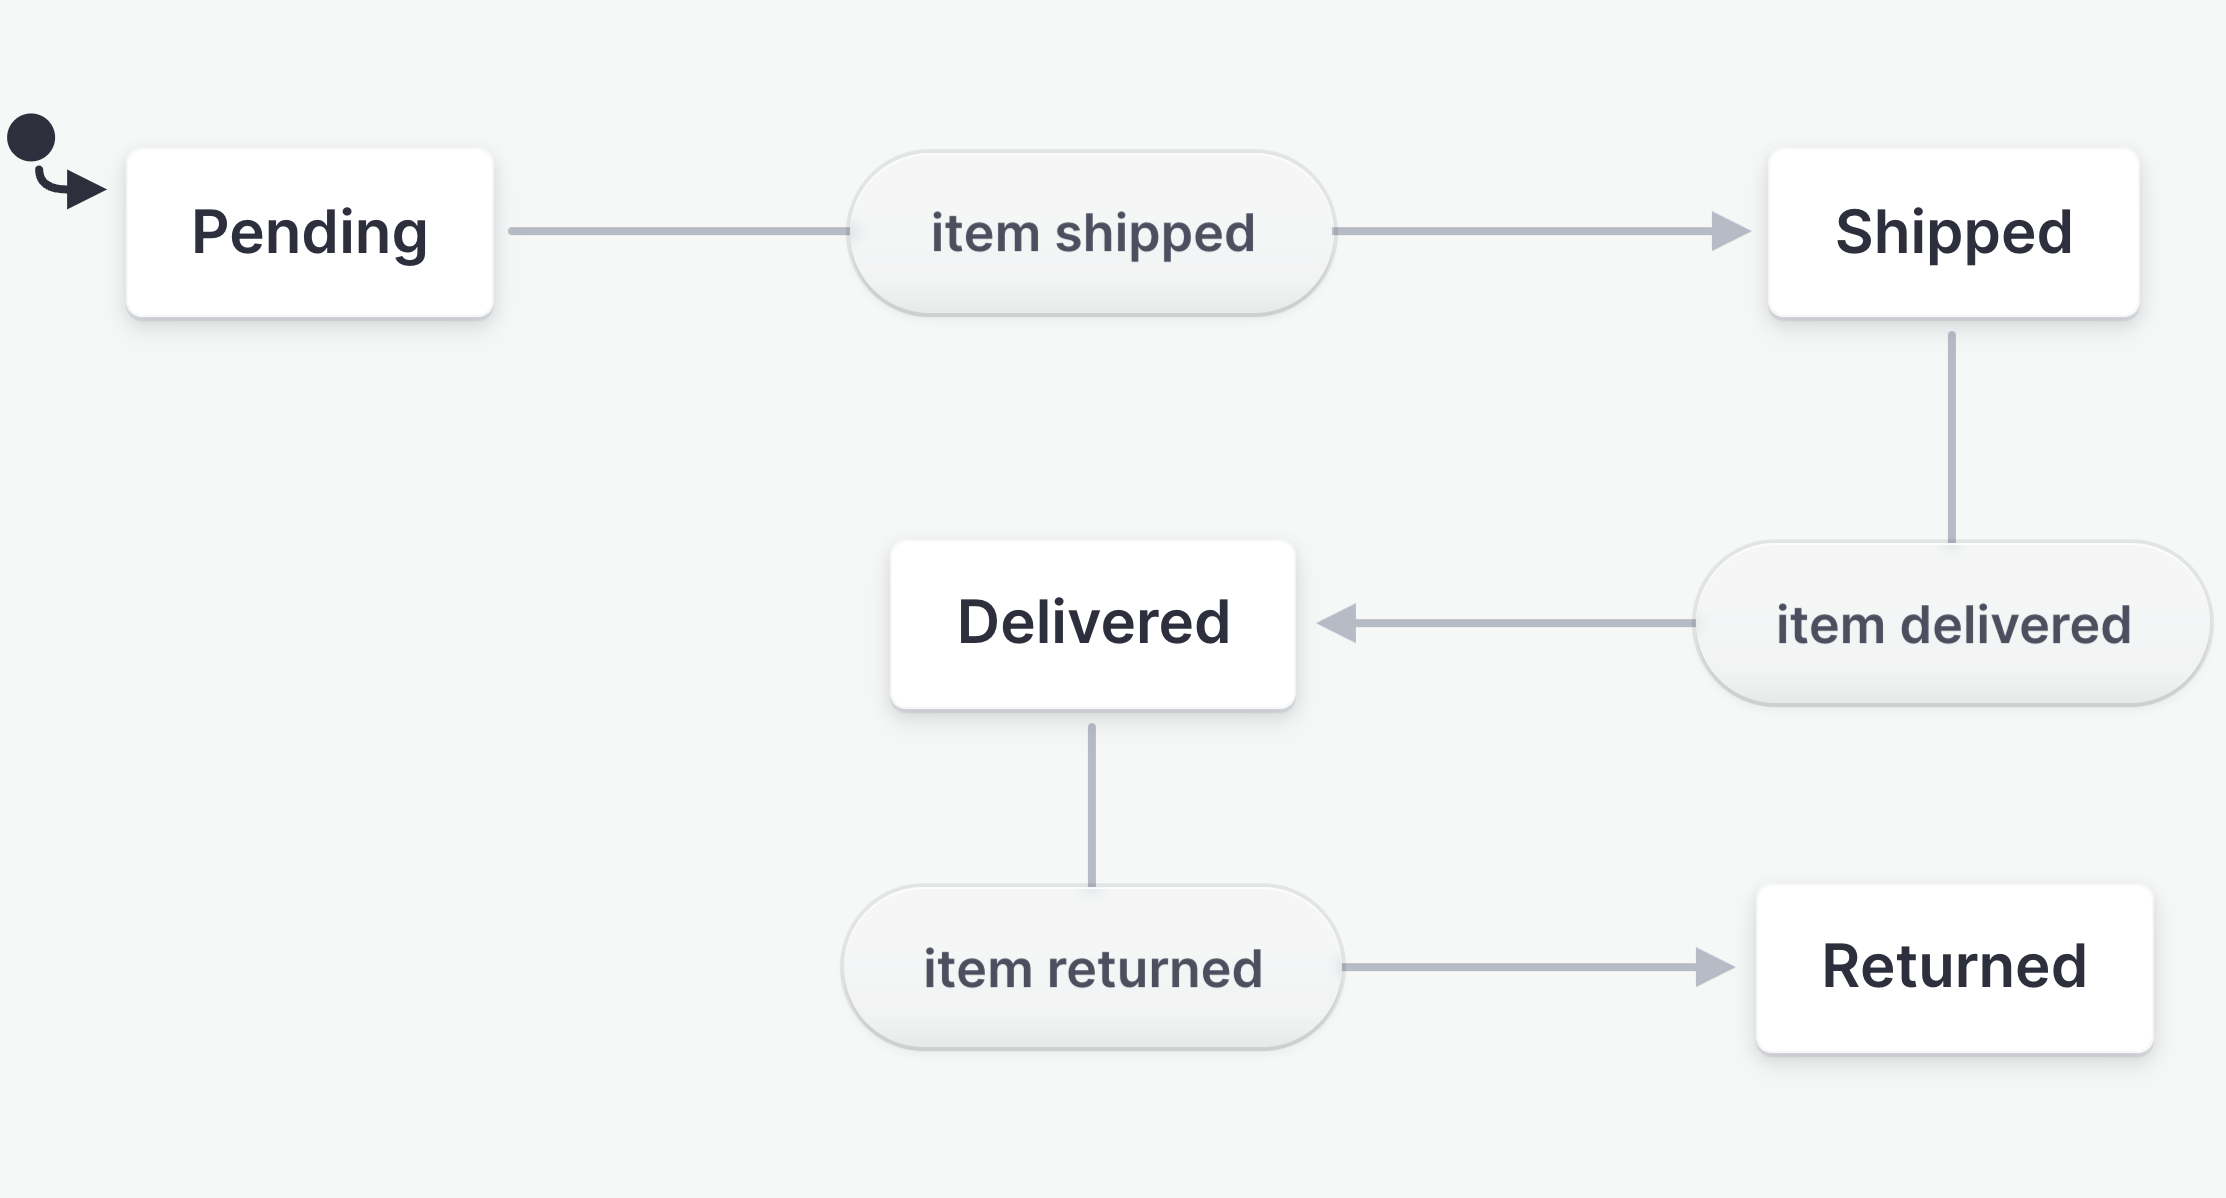 State machine for an order: the states are pending, shipped, delivered, and returned.